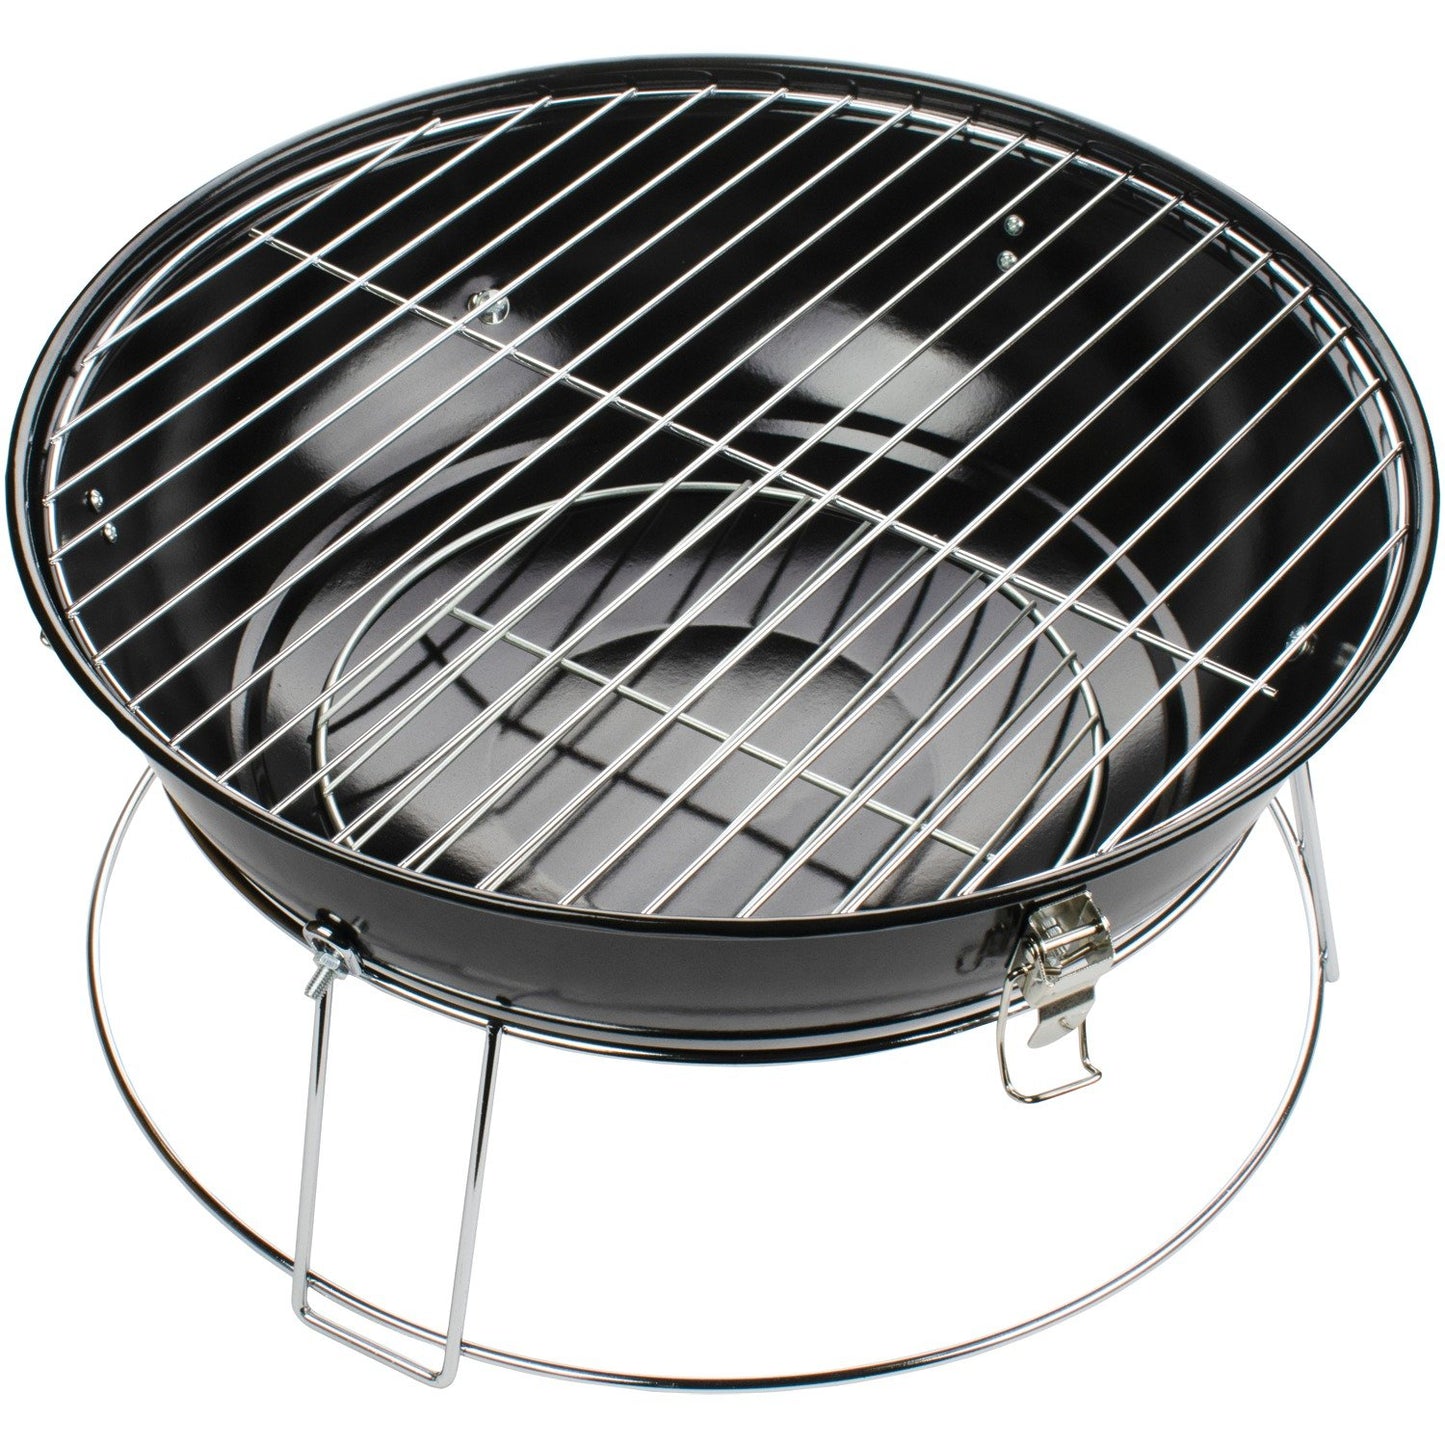 Brentwood Appl. BB-1400R 14" Portable Charcoal Grill (Red)